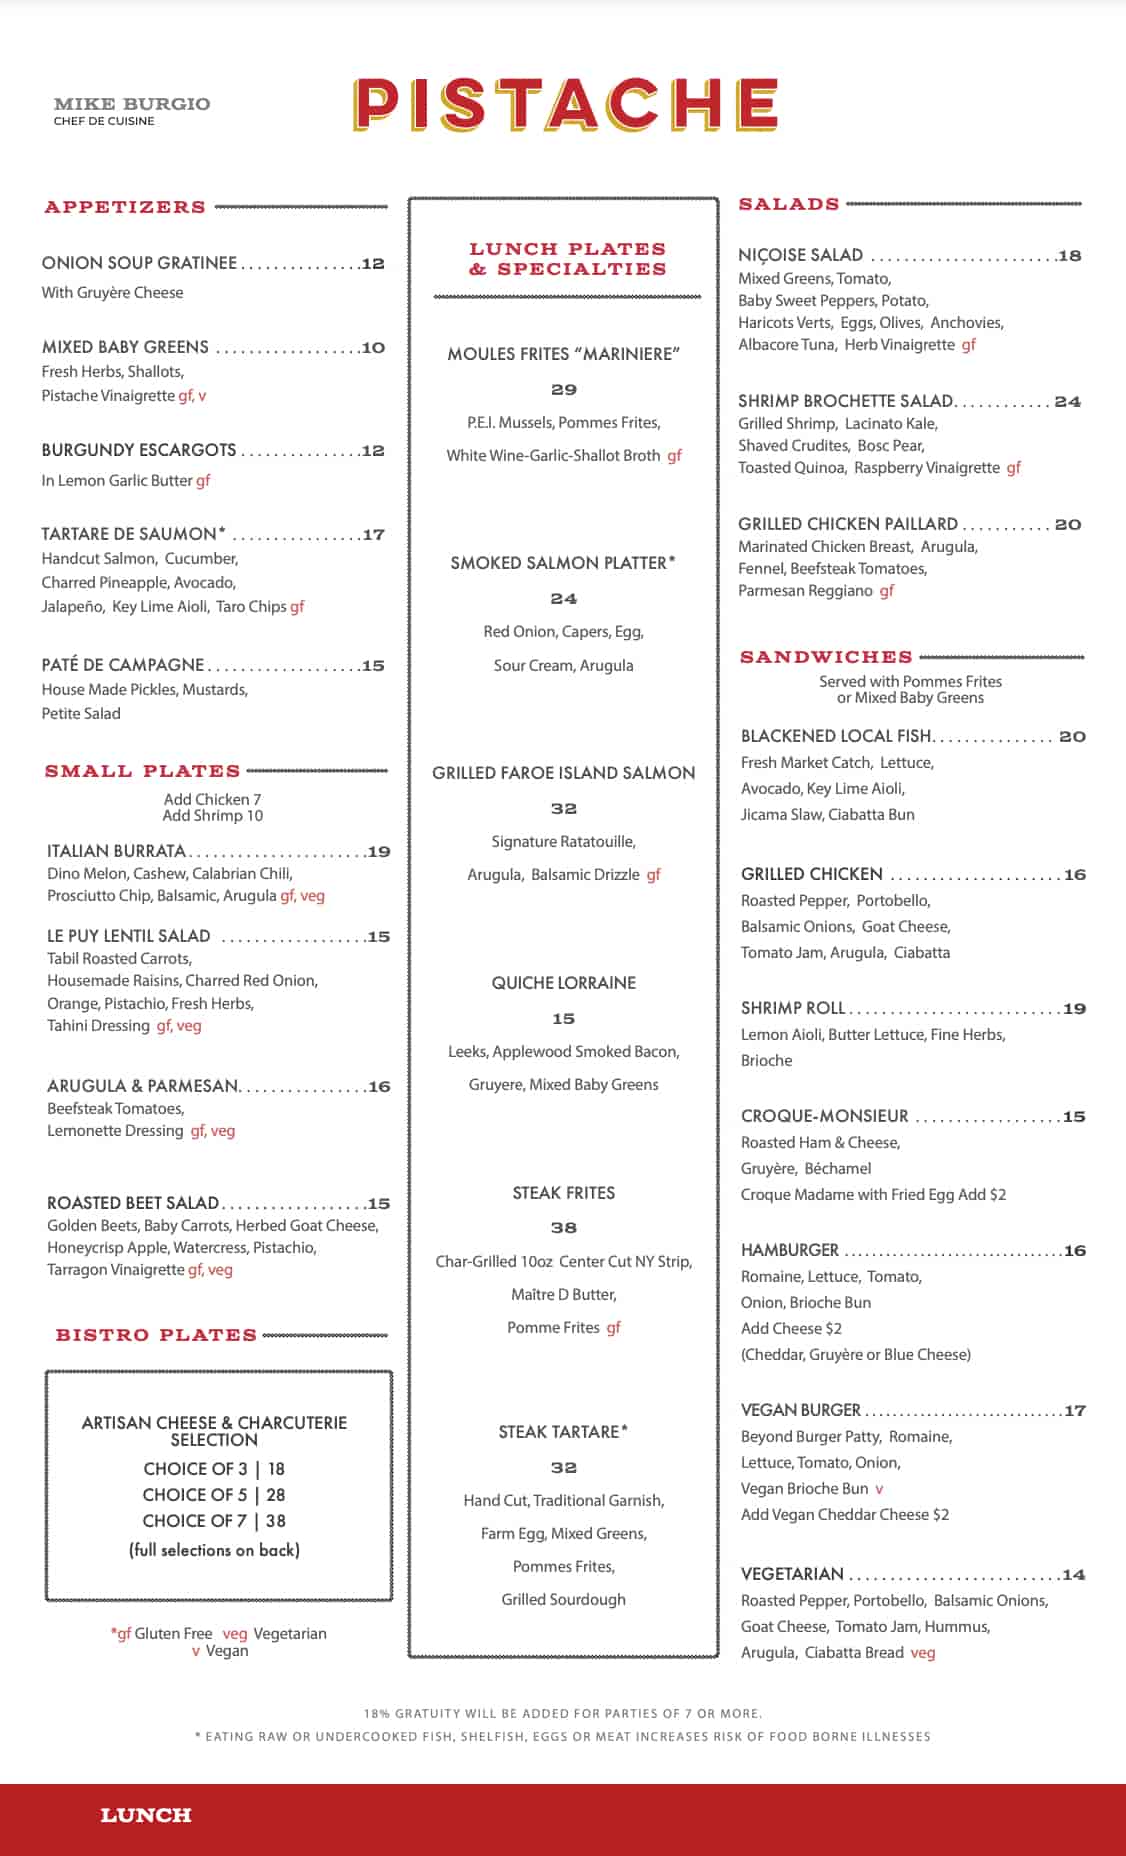 Pistache French Bistro Menu With Prices